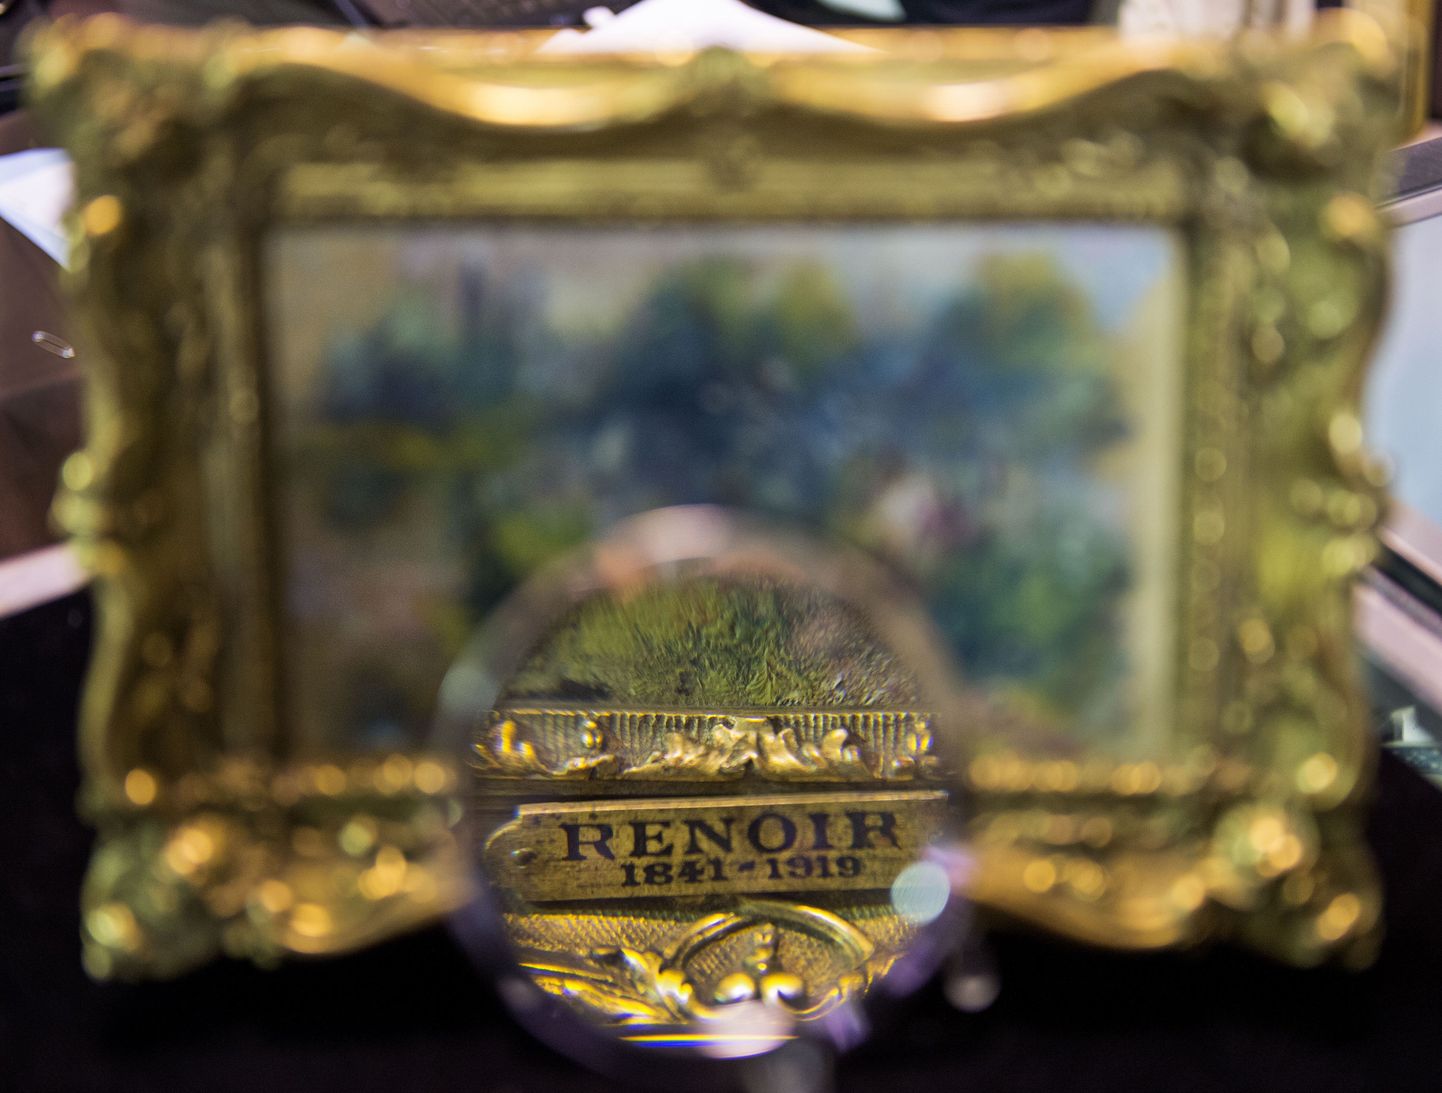 An art shopper looks closely at a 5.5 inch by 6.6 inch (14 centimeter by 23 centimeter) painting by French Impressionist master Pierre-Auguste Renoir September 25, 2012 in Alexandria, Virginia. The painting was recently discovered for just a few dollars at a Virgina flea market sale. The canvas which shows a scene along the Seine River titled "Paysage Bords de Seine" is scheduled to be auctioned September 29, 2012 at the Potomack Company, in Alexandria, Virginia, selling for an expected 75,000 to 100,000 USD. It was for sale in a box with a plastic cow and a Paul Bunyan doll  for 50.00 USD and still carries a label from the Berheim-Jeune arthouse in Paris, a famous purveyor of works by Renoir.   AFP PHOTO/Paul J. Richards